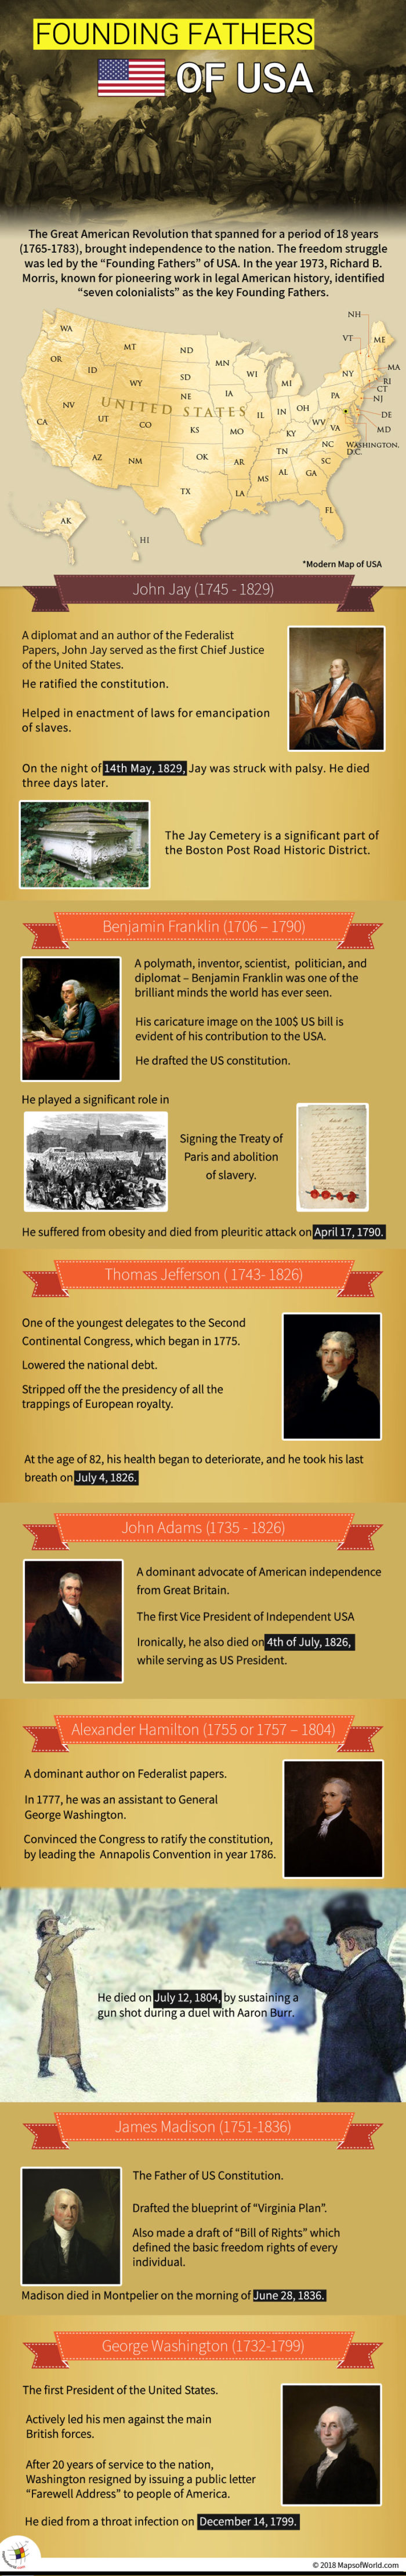 Infographic elaborating Founding Fathers of USA